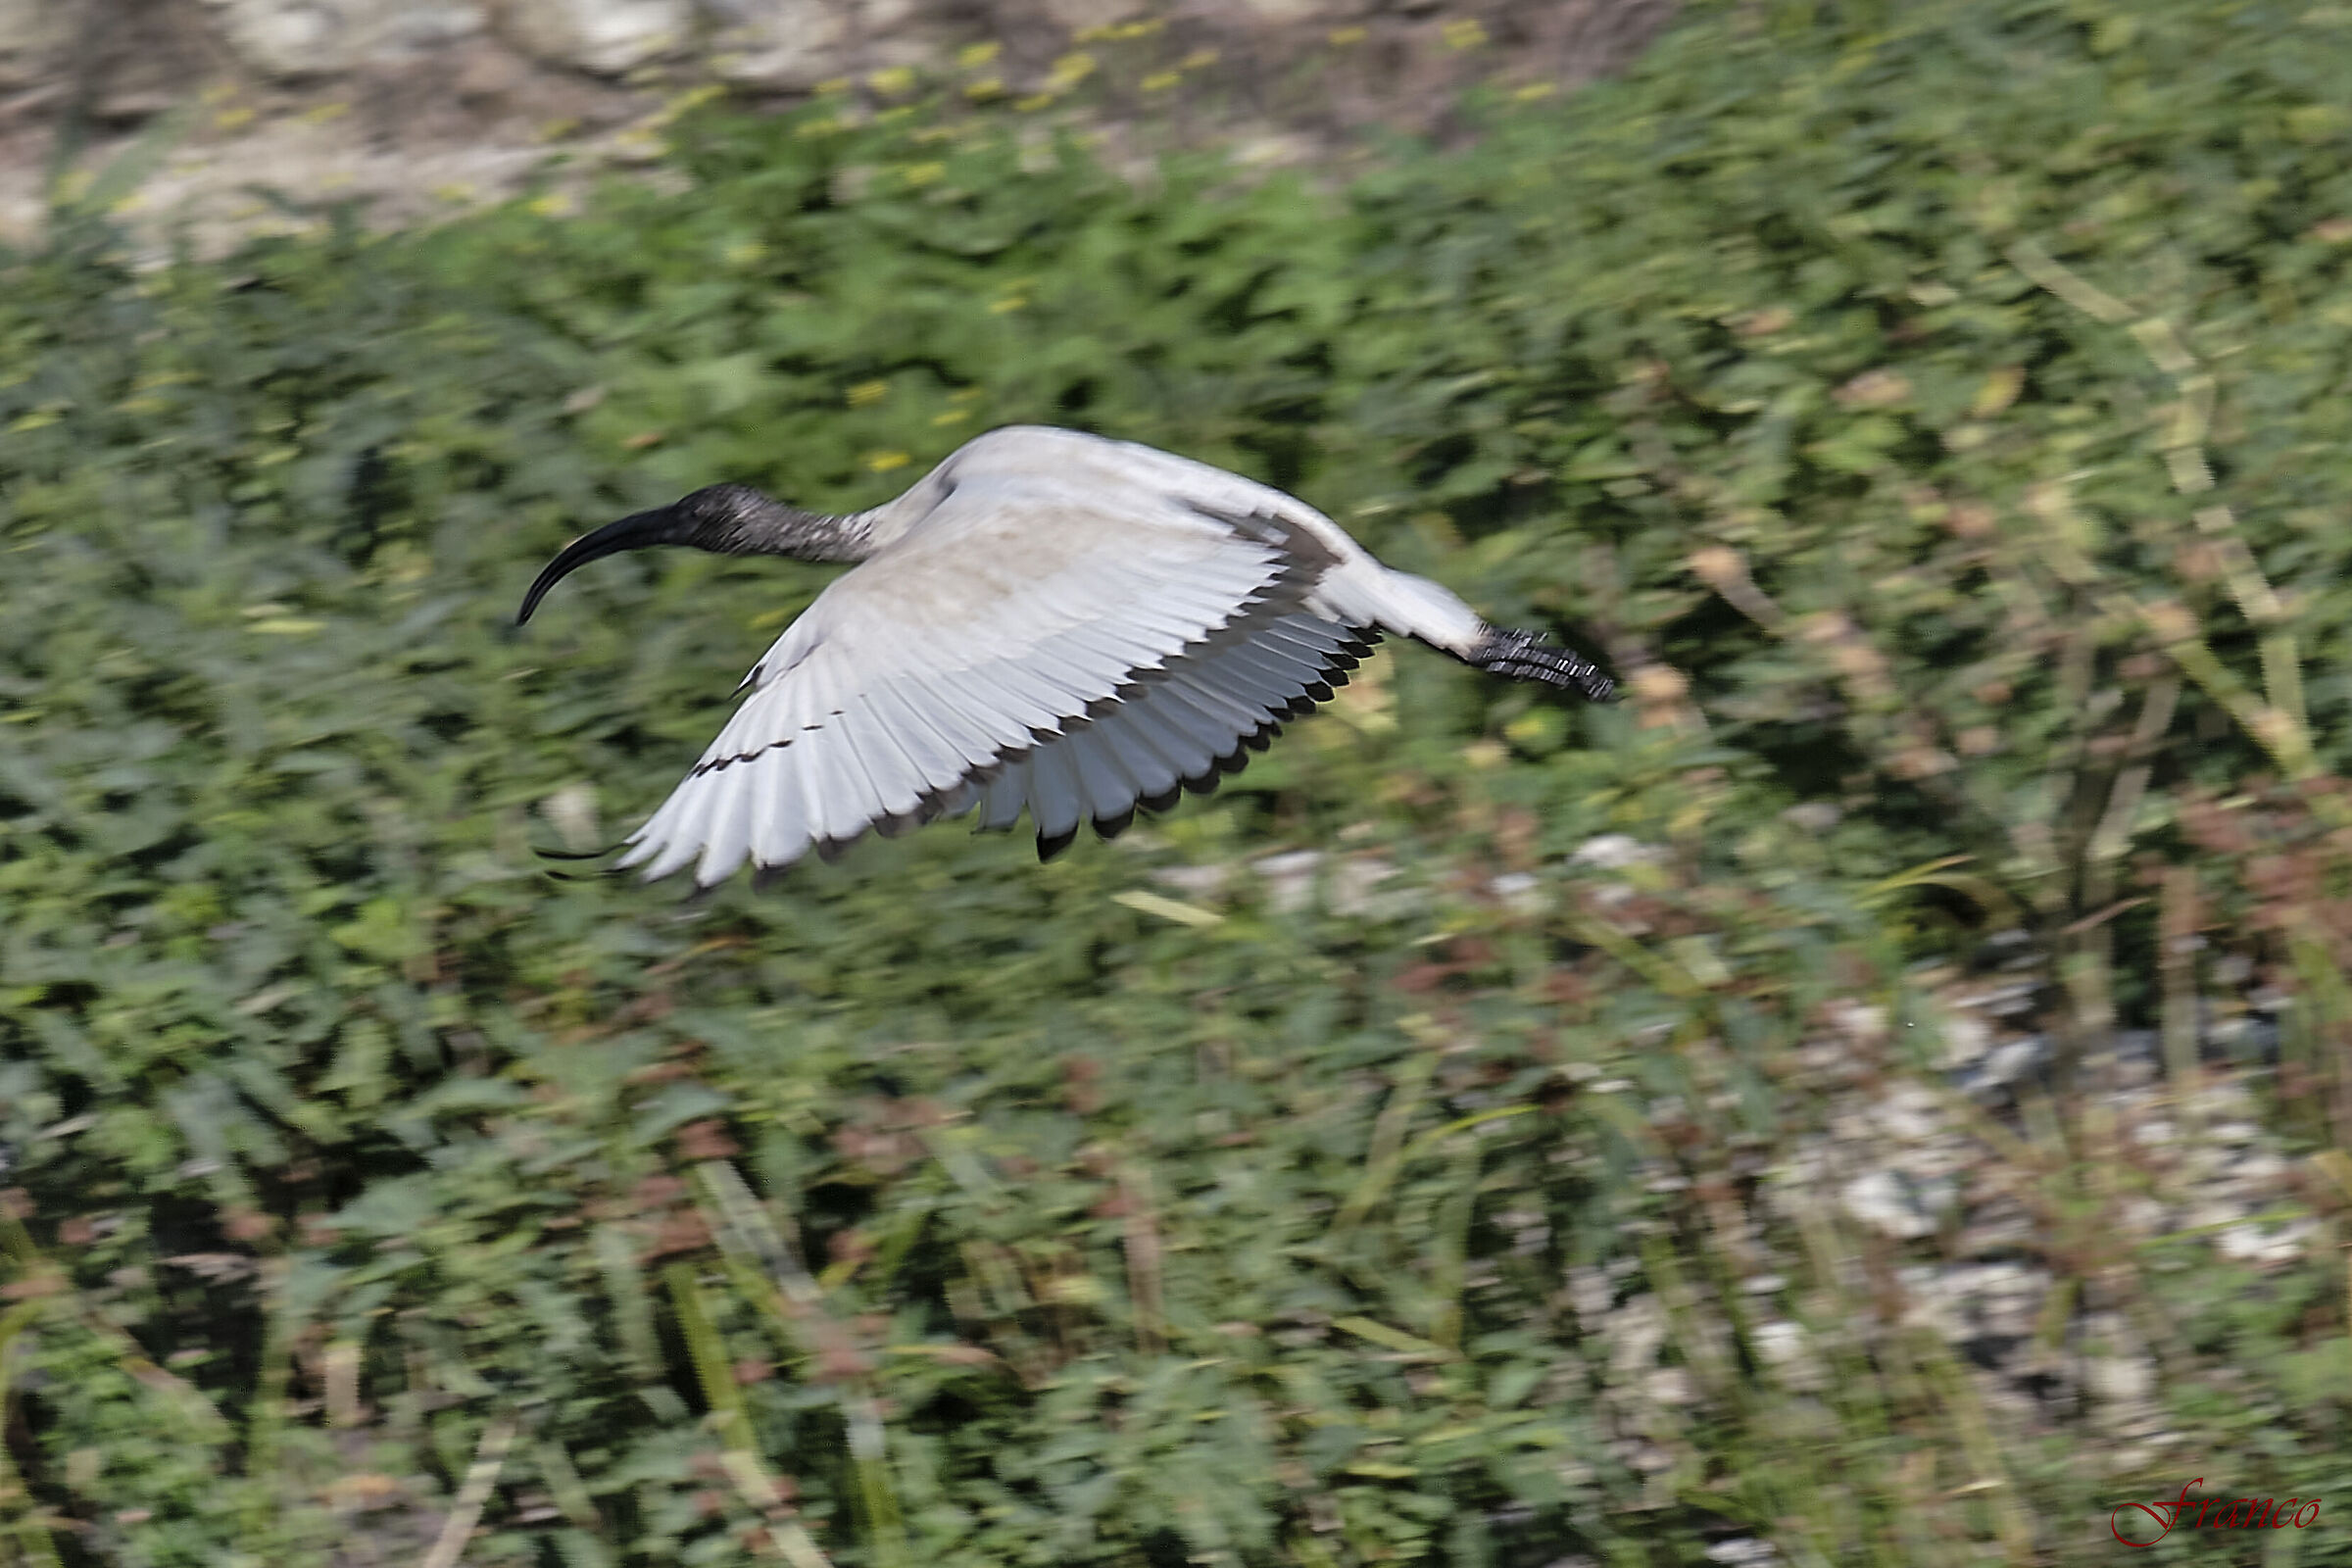 The flight of the Royal Ibis...